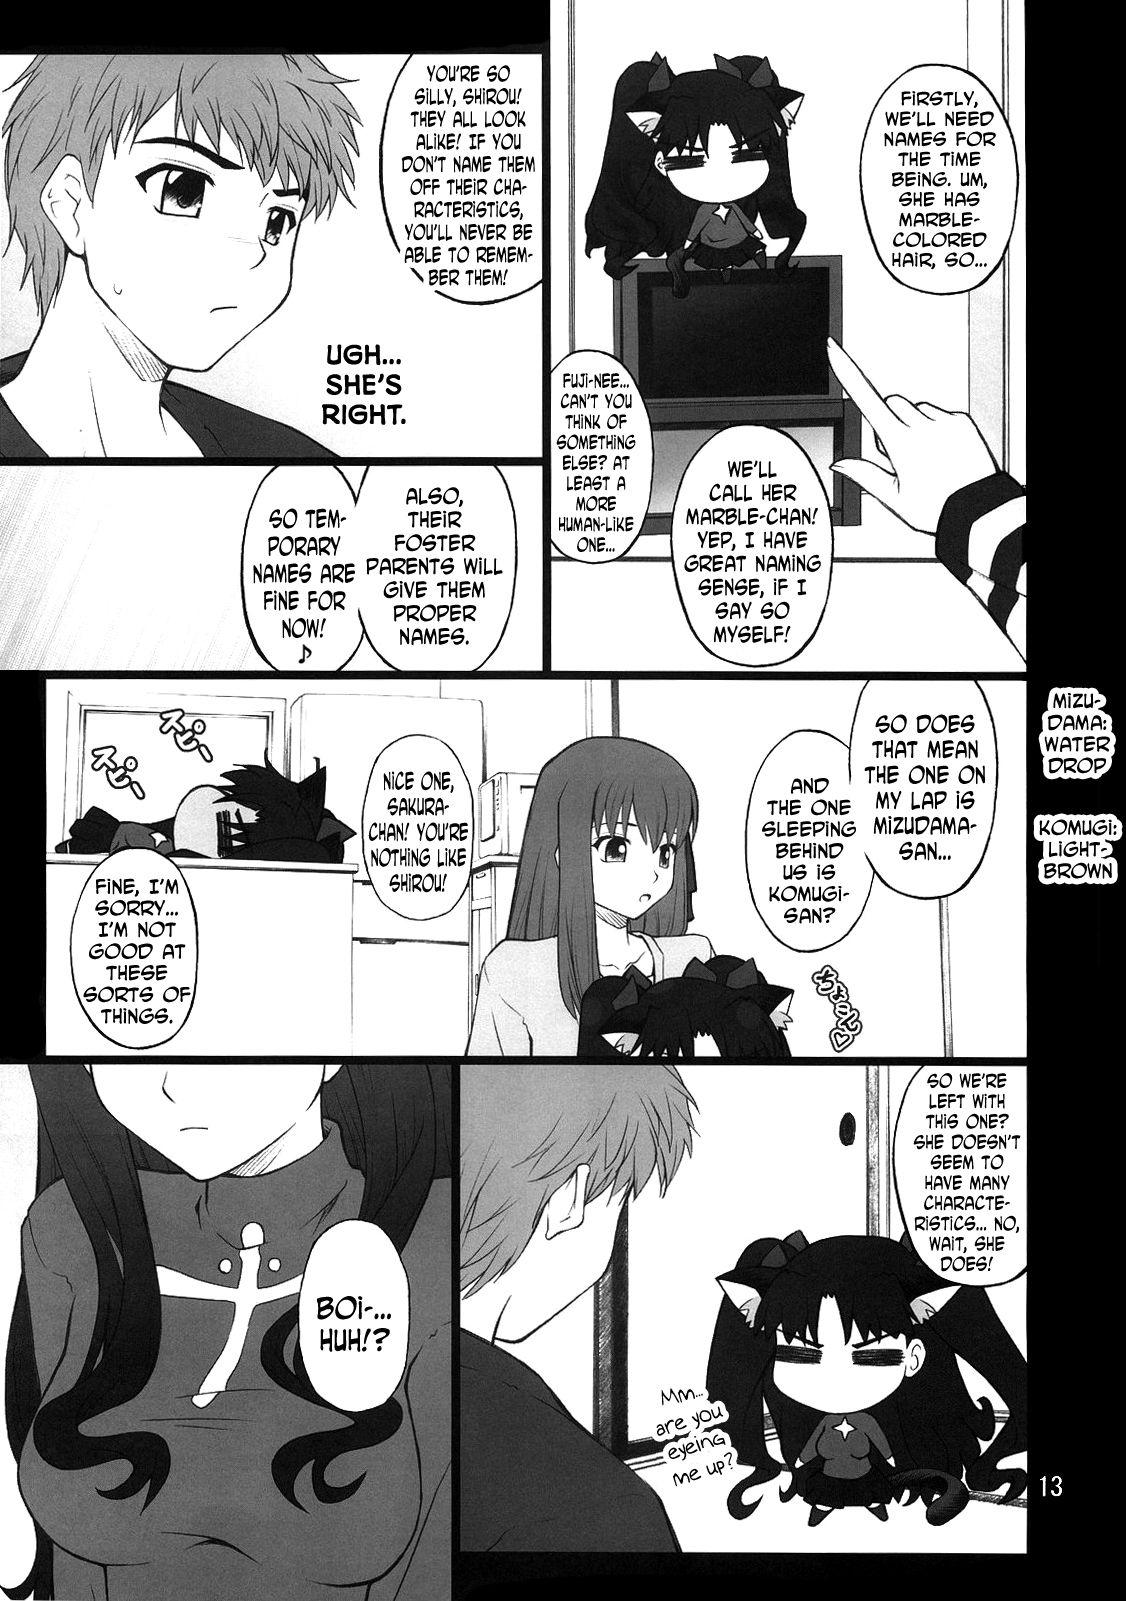 Boquete Grem-Rin 2 - Fate stay night Titties - Page 12